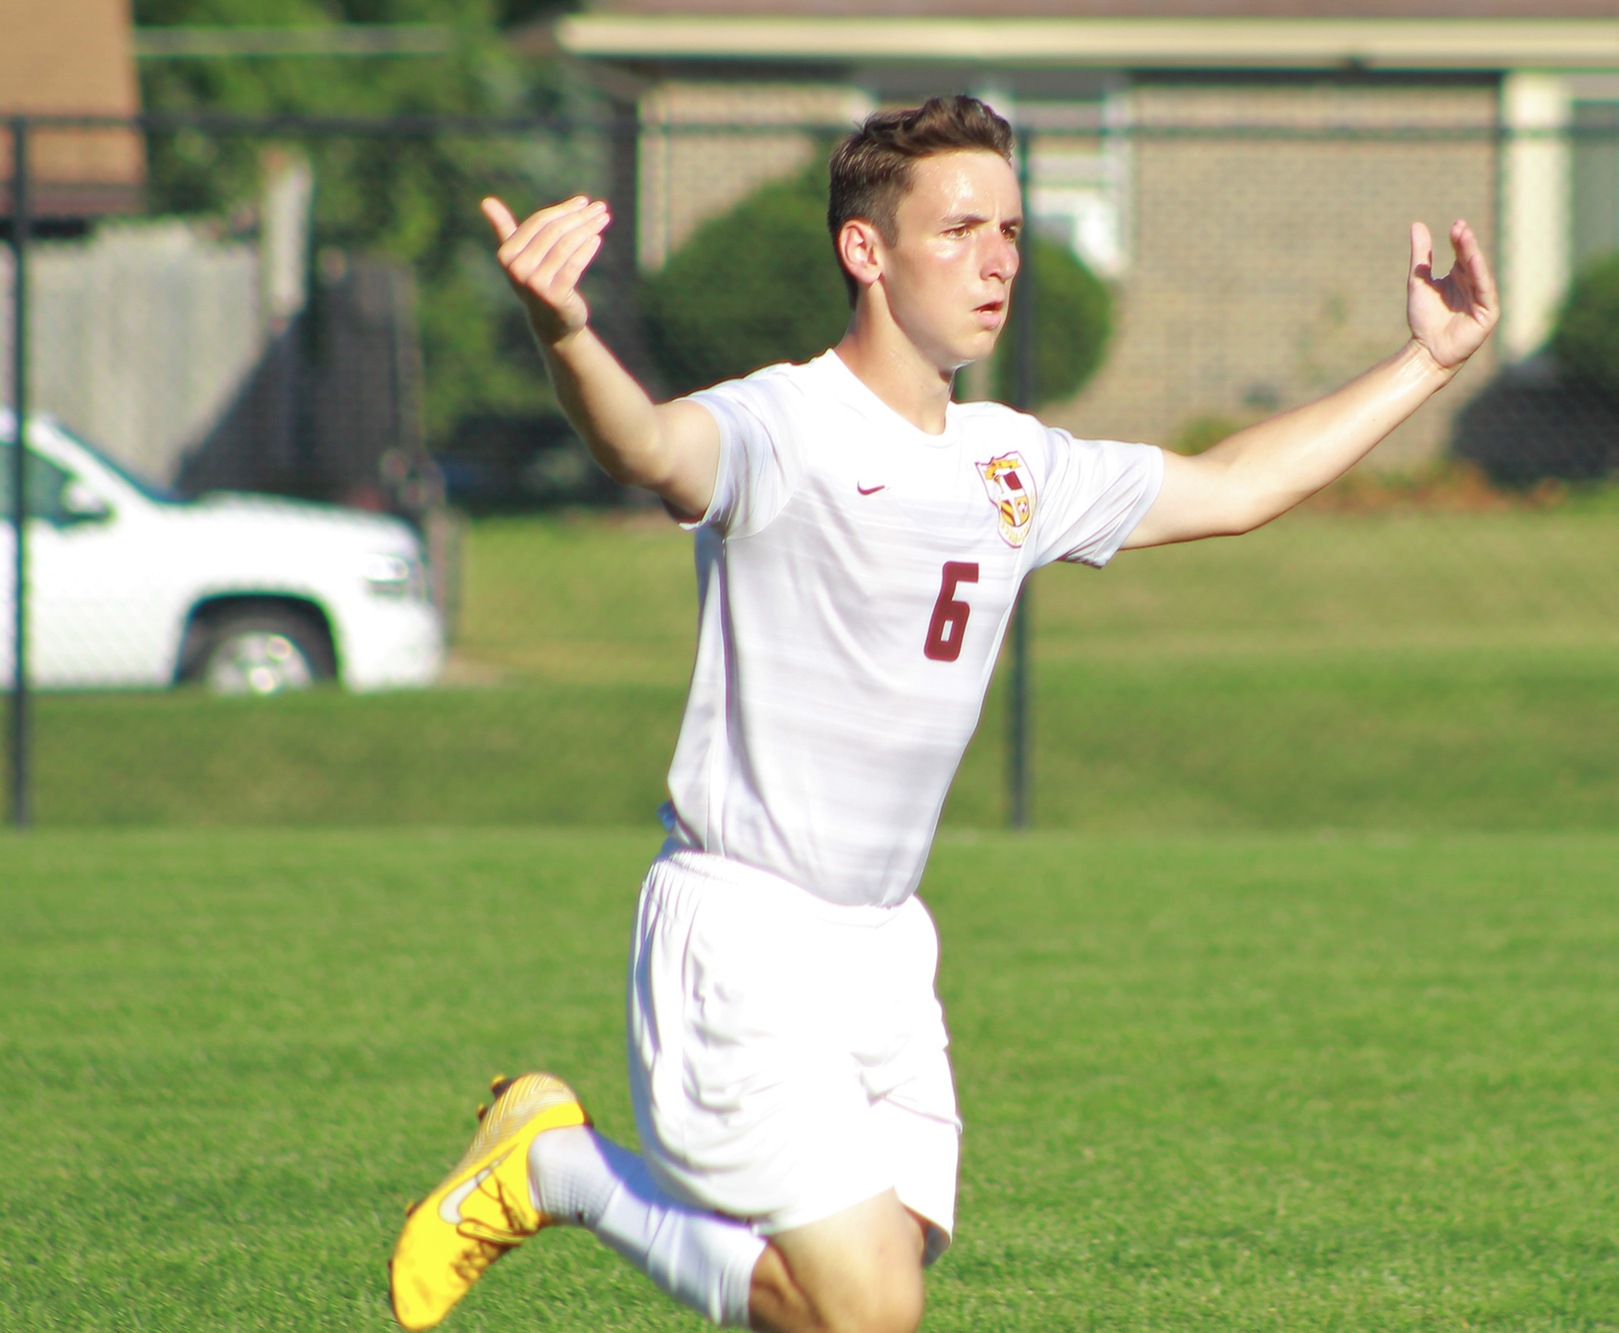 Nathan Stupka scored the only goal for the Faith Eagles in a Double OT tie with Union College